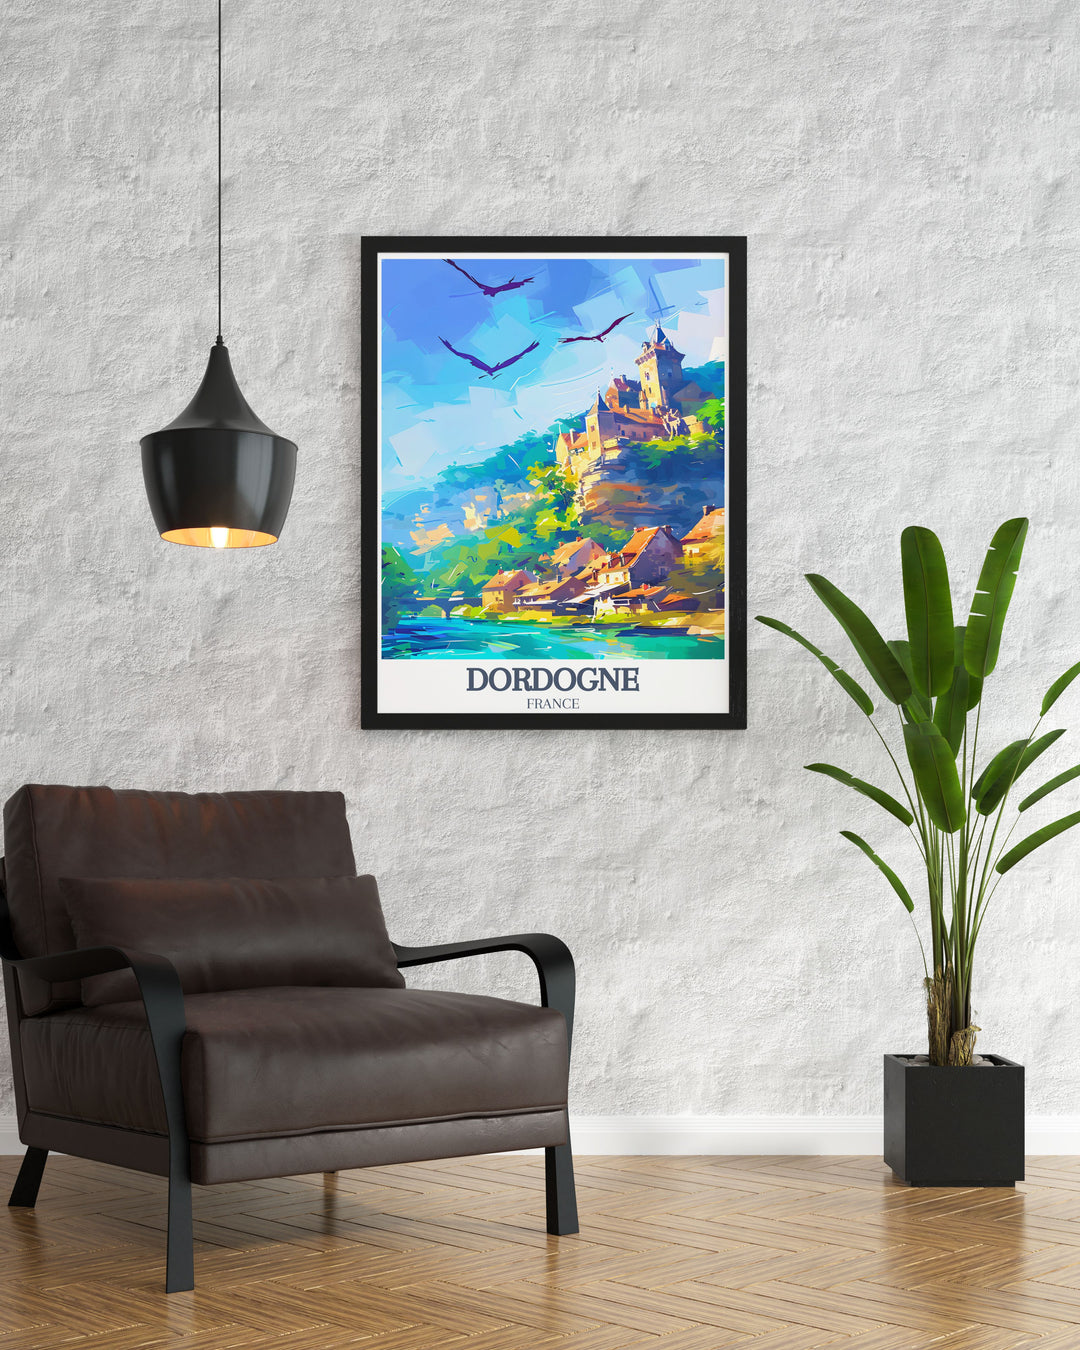 Beautiful Dordogne travel gift with a detailed illustration of Chateau de Beynac and La Roque Gageac perfect for those who love French history and scenic views